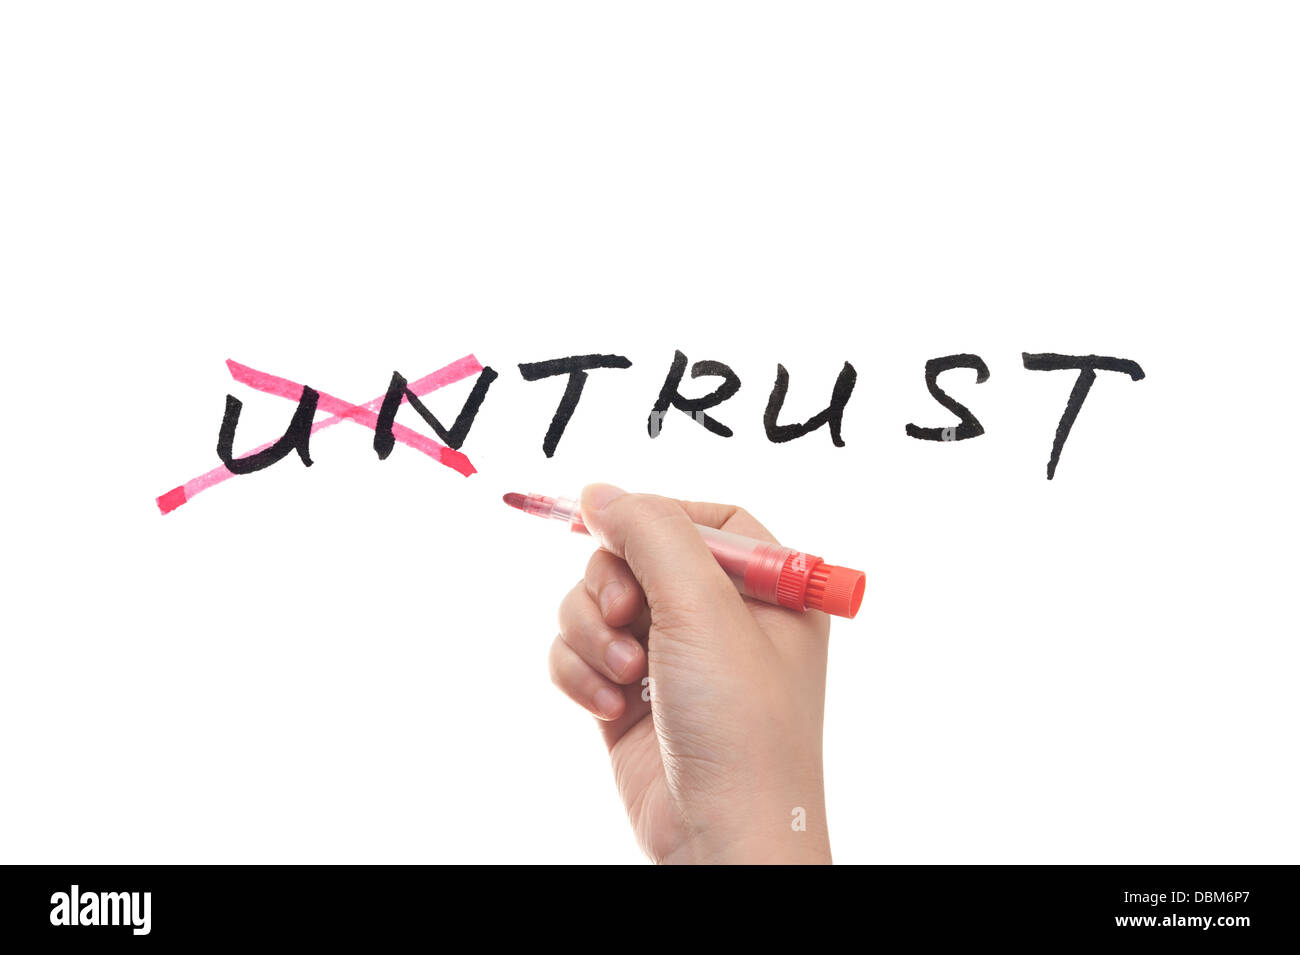 Untrust to trust concept, hand writing on white board Stock Photo